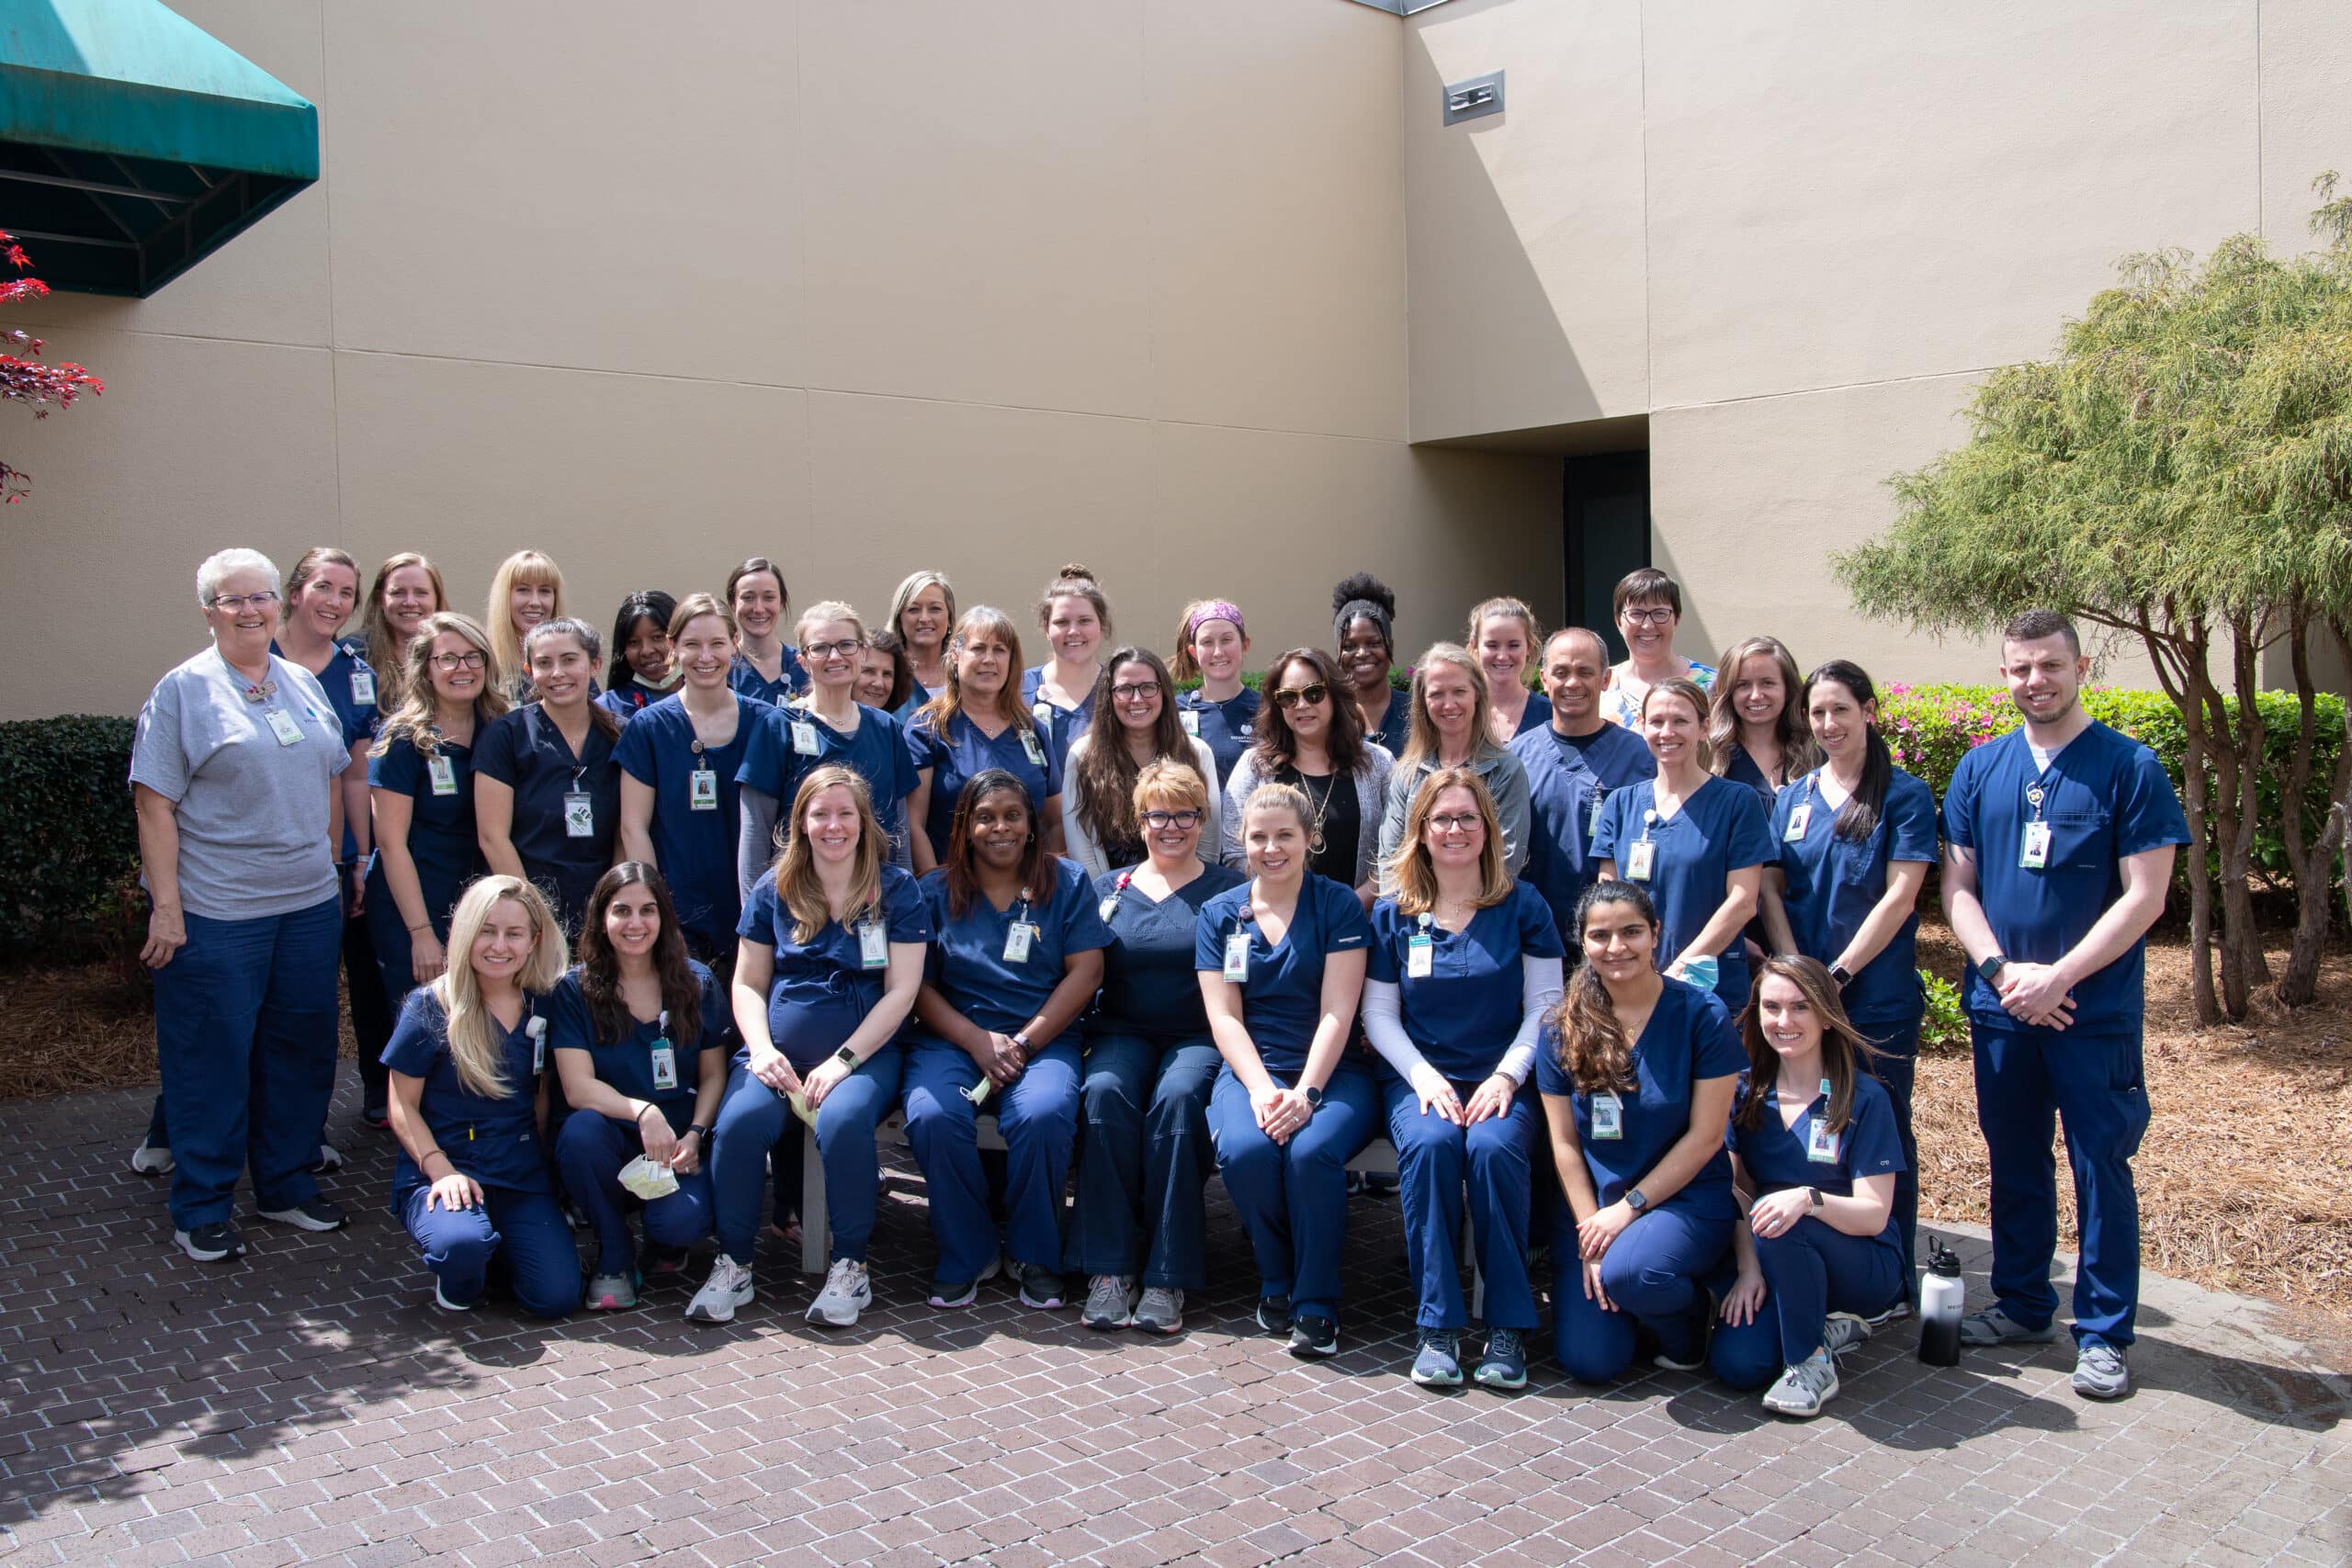 Occupational Therapists at ECU Health Medical Center pose for a photo.